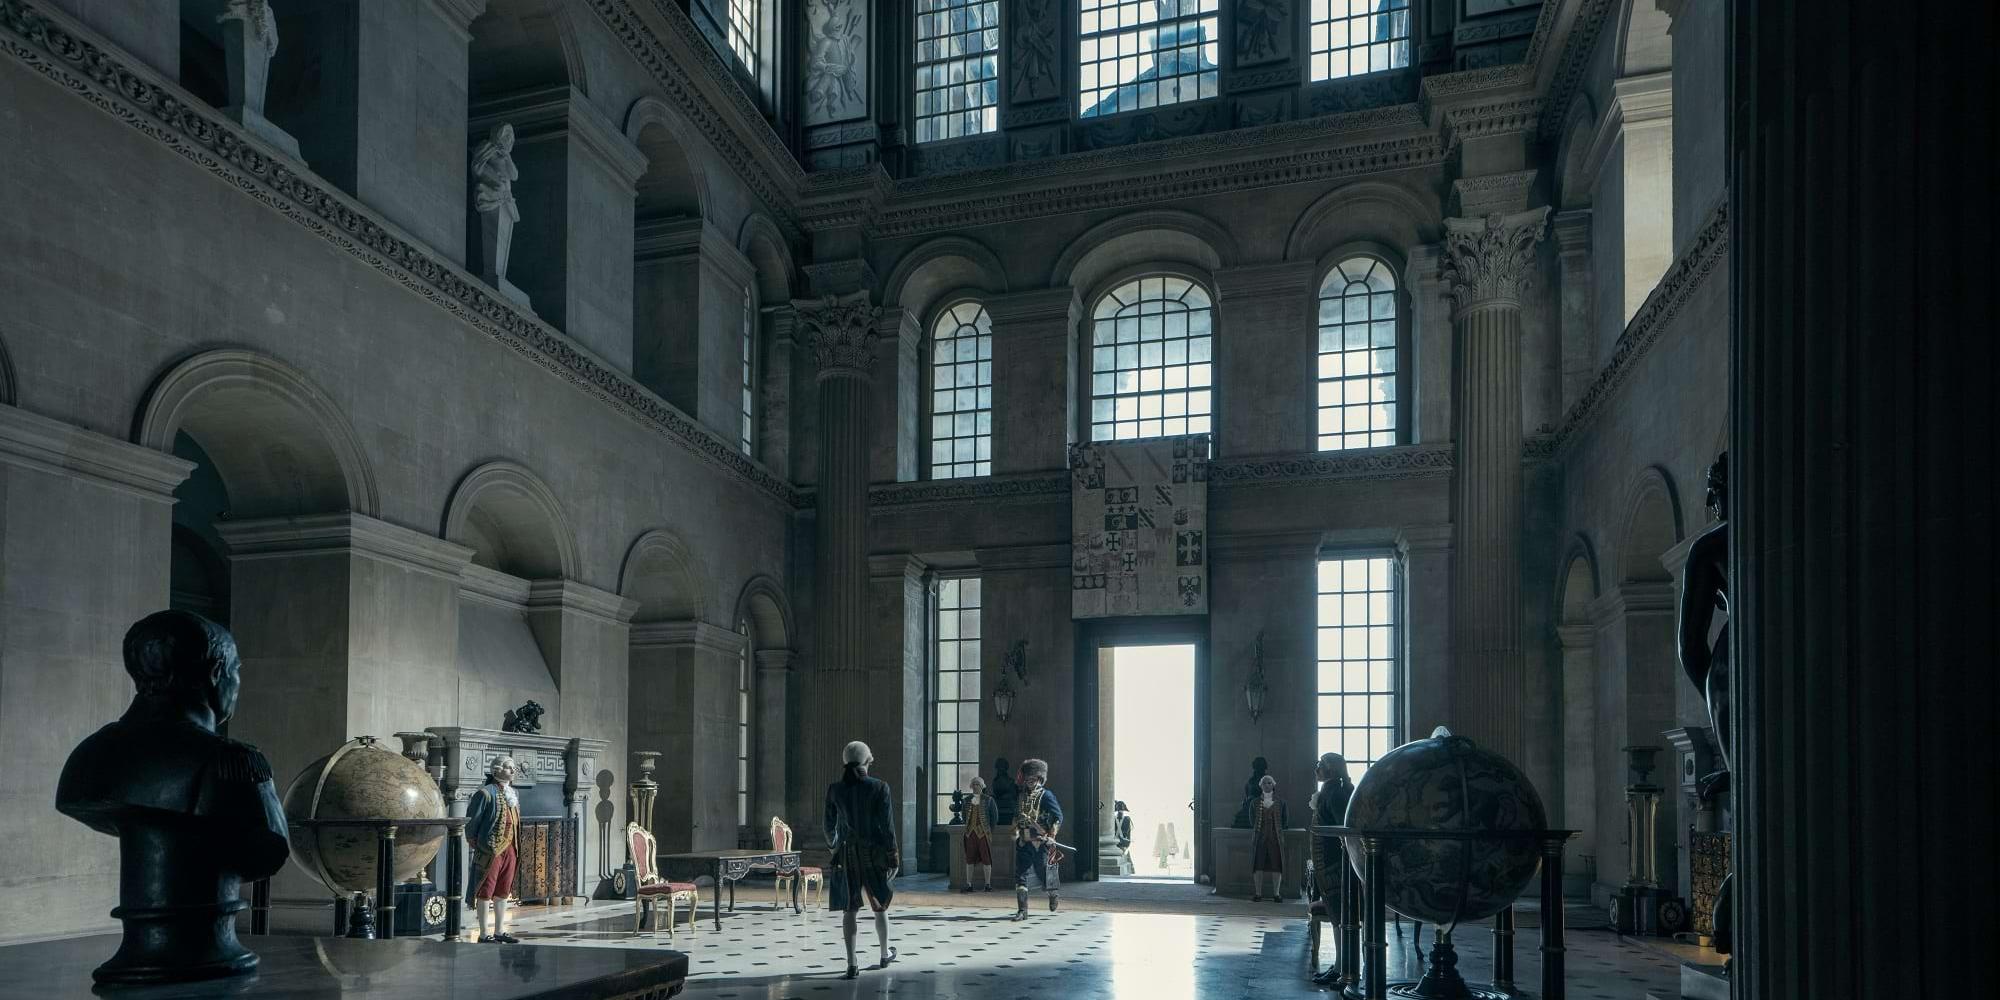 Scene from Napoleon in Great Hall